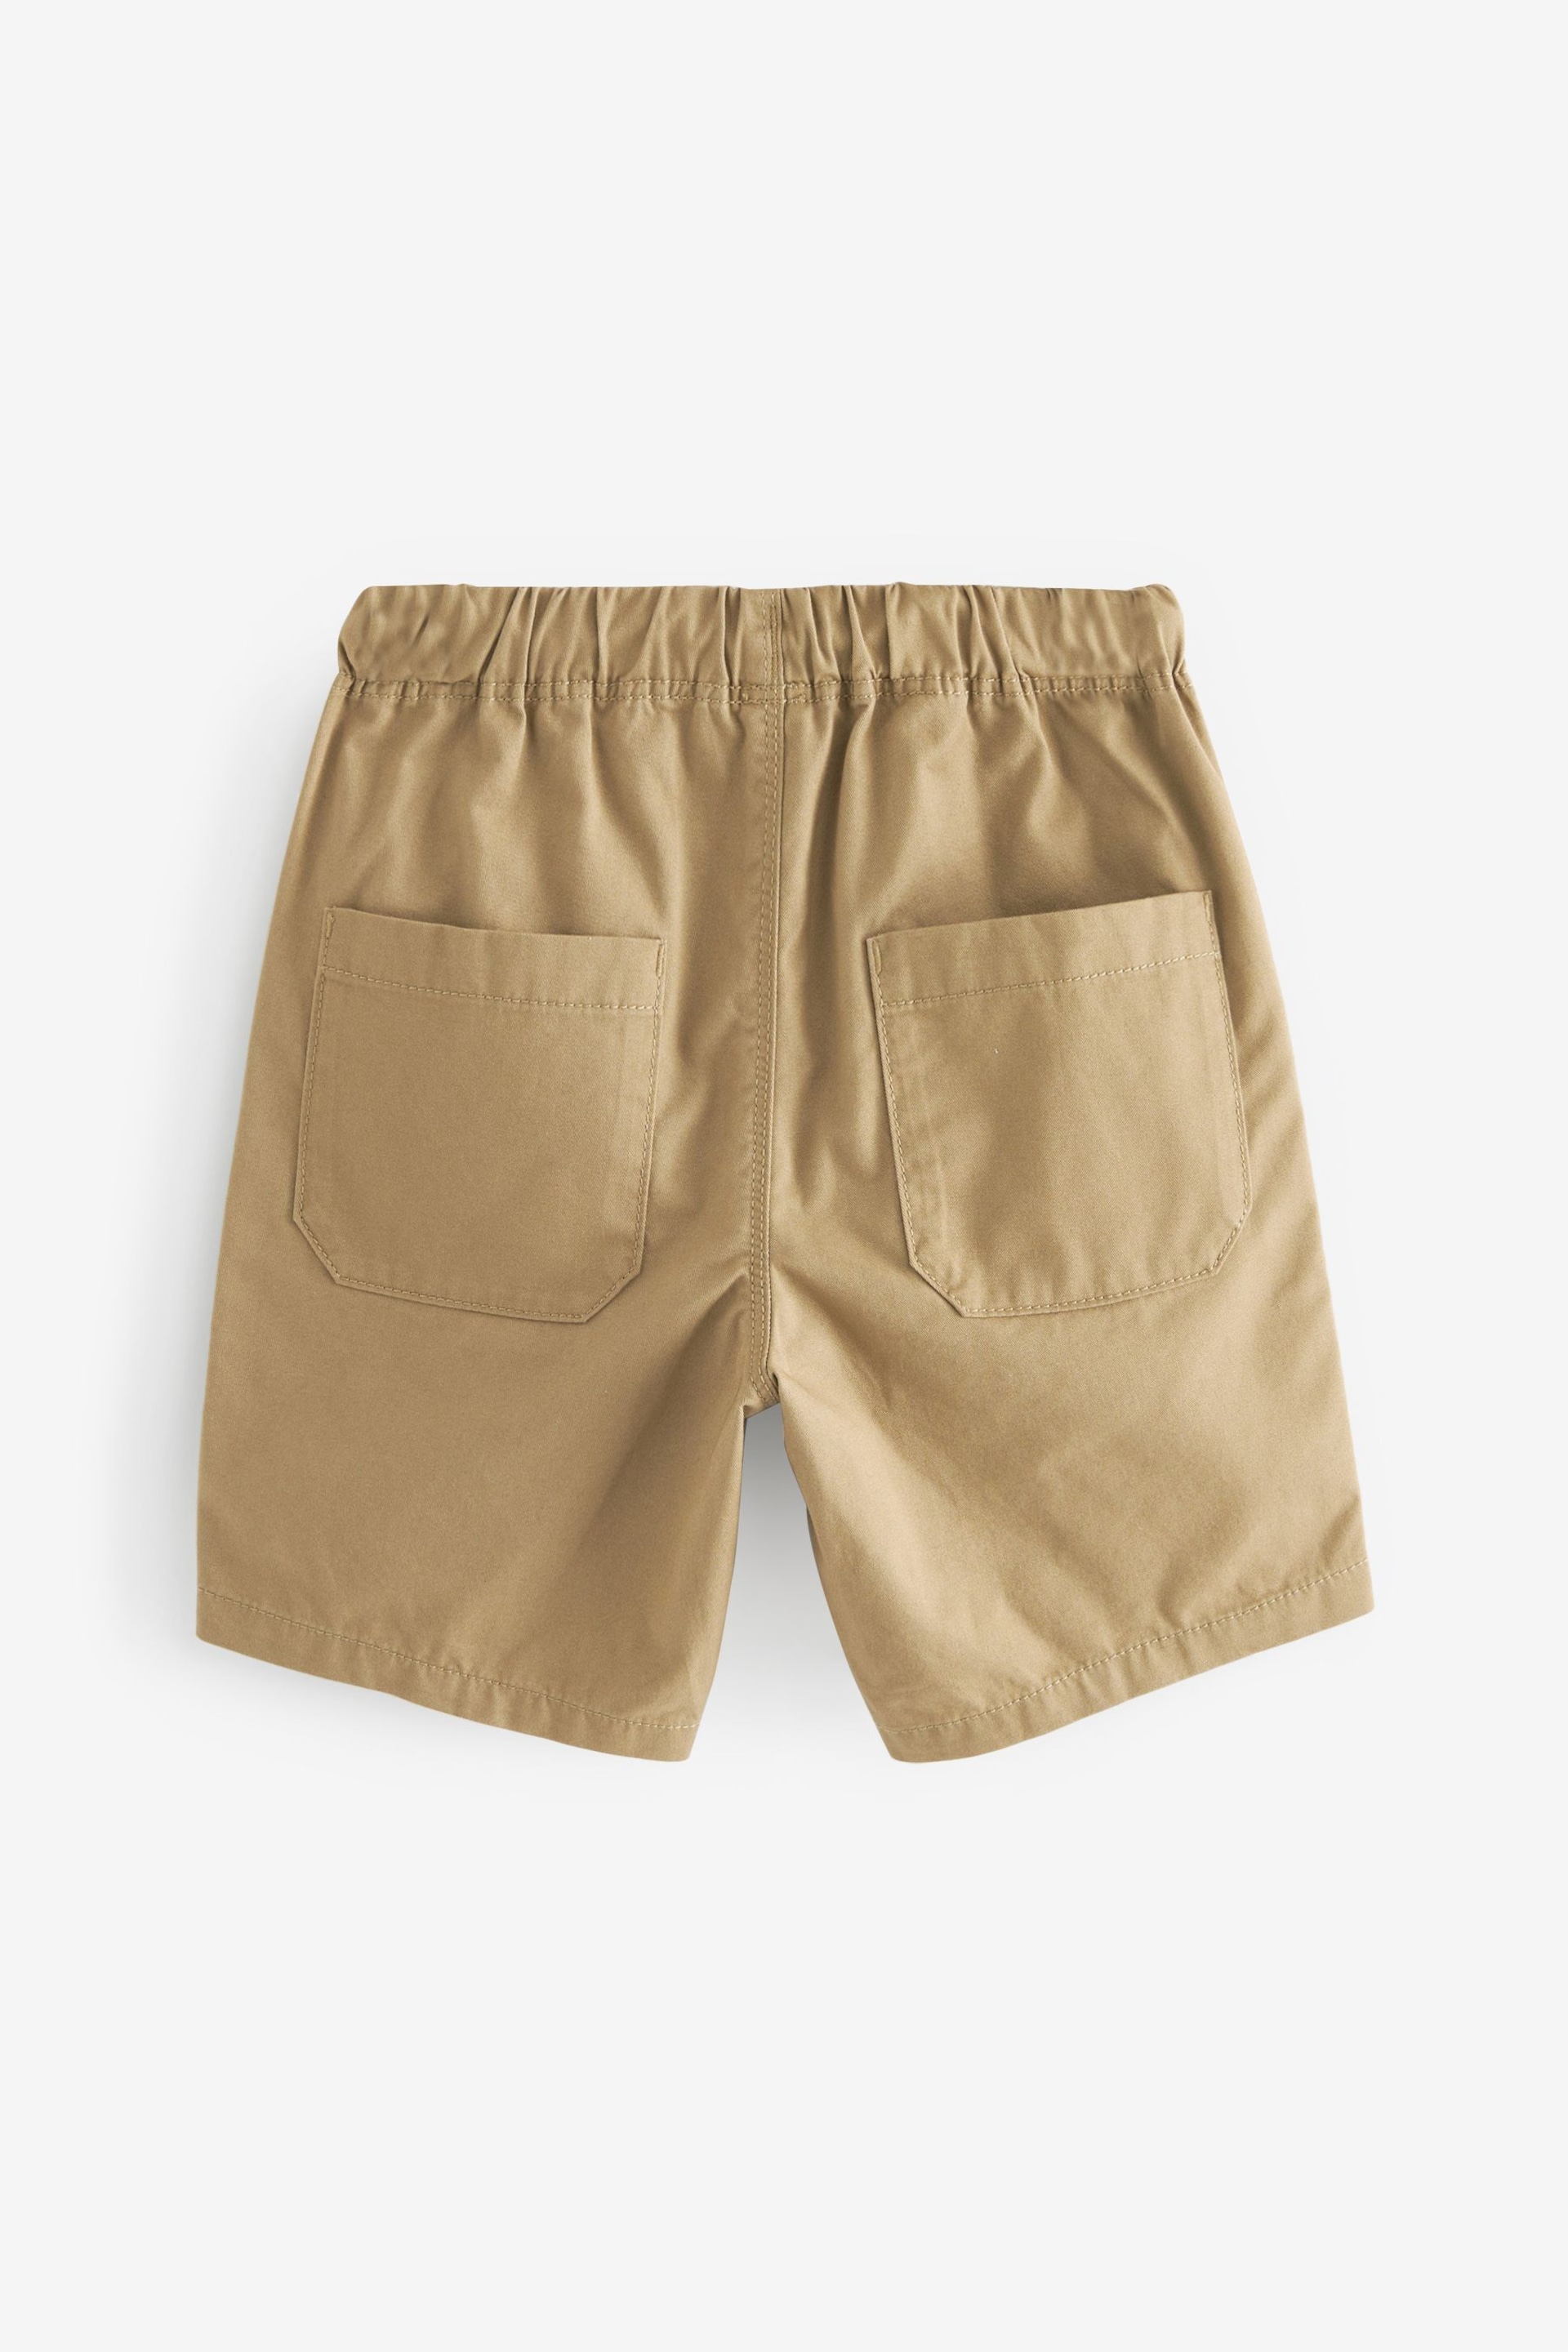 Tan Brown Single Pull-On Shorts (3-16yrs) - Image 2 of 3